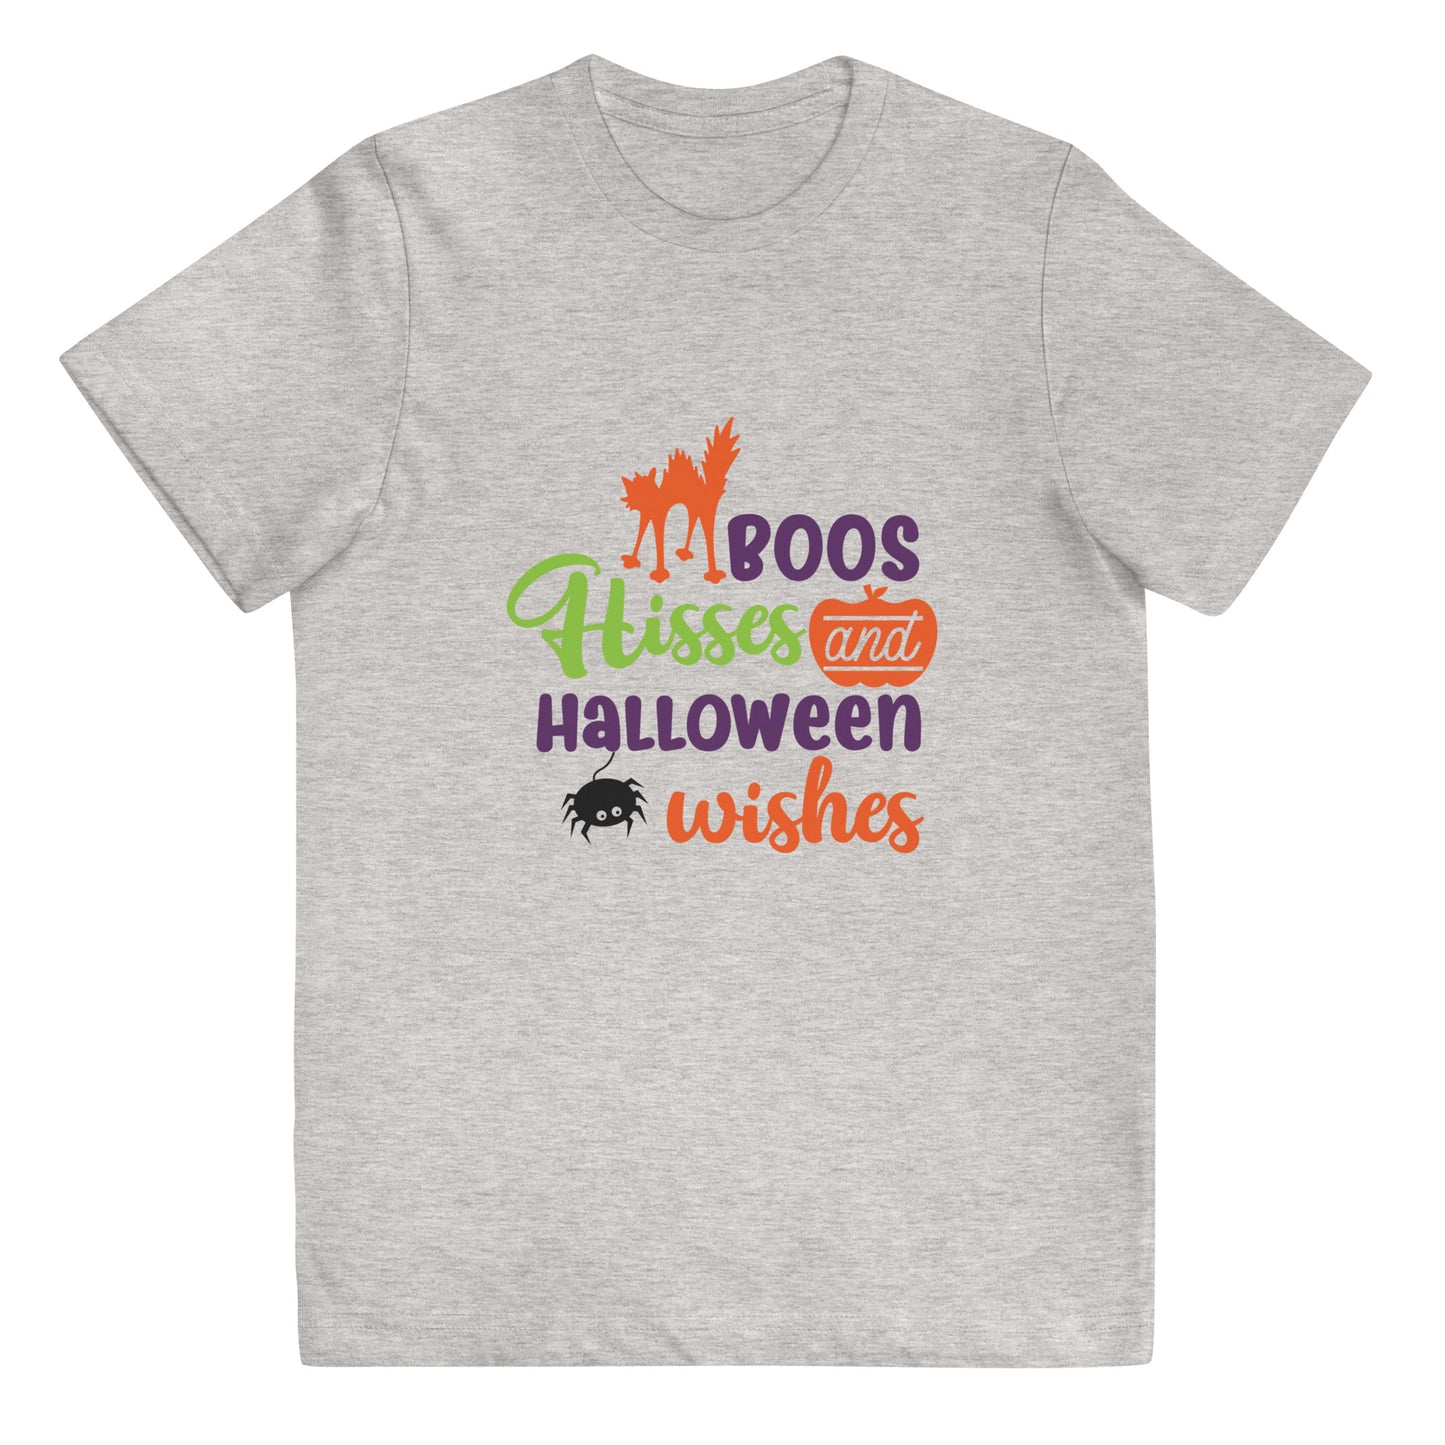 Boos Hisses and Halloween Wishes Youth Tshirt